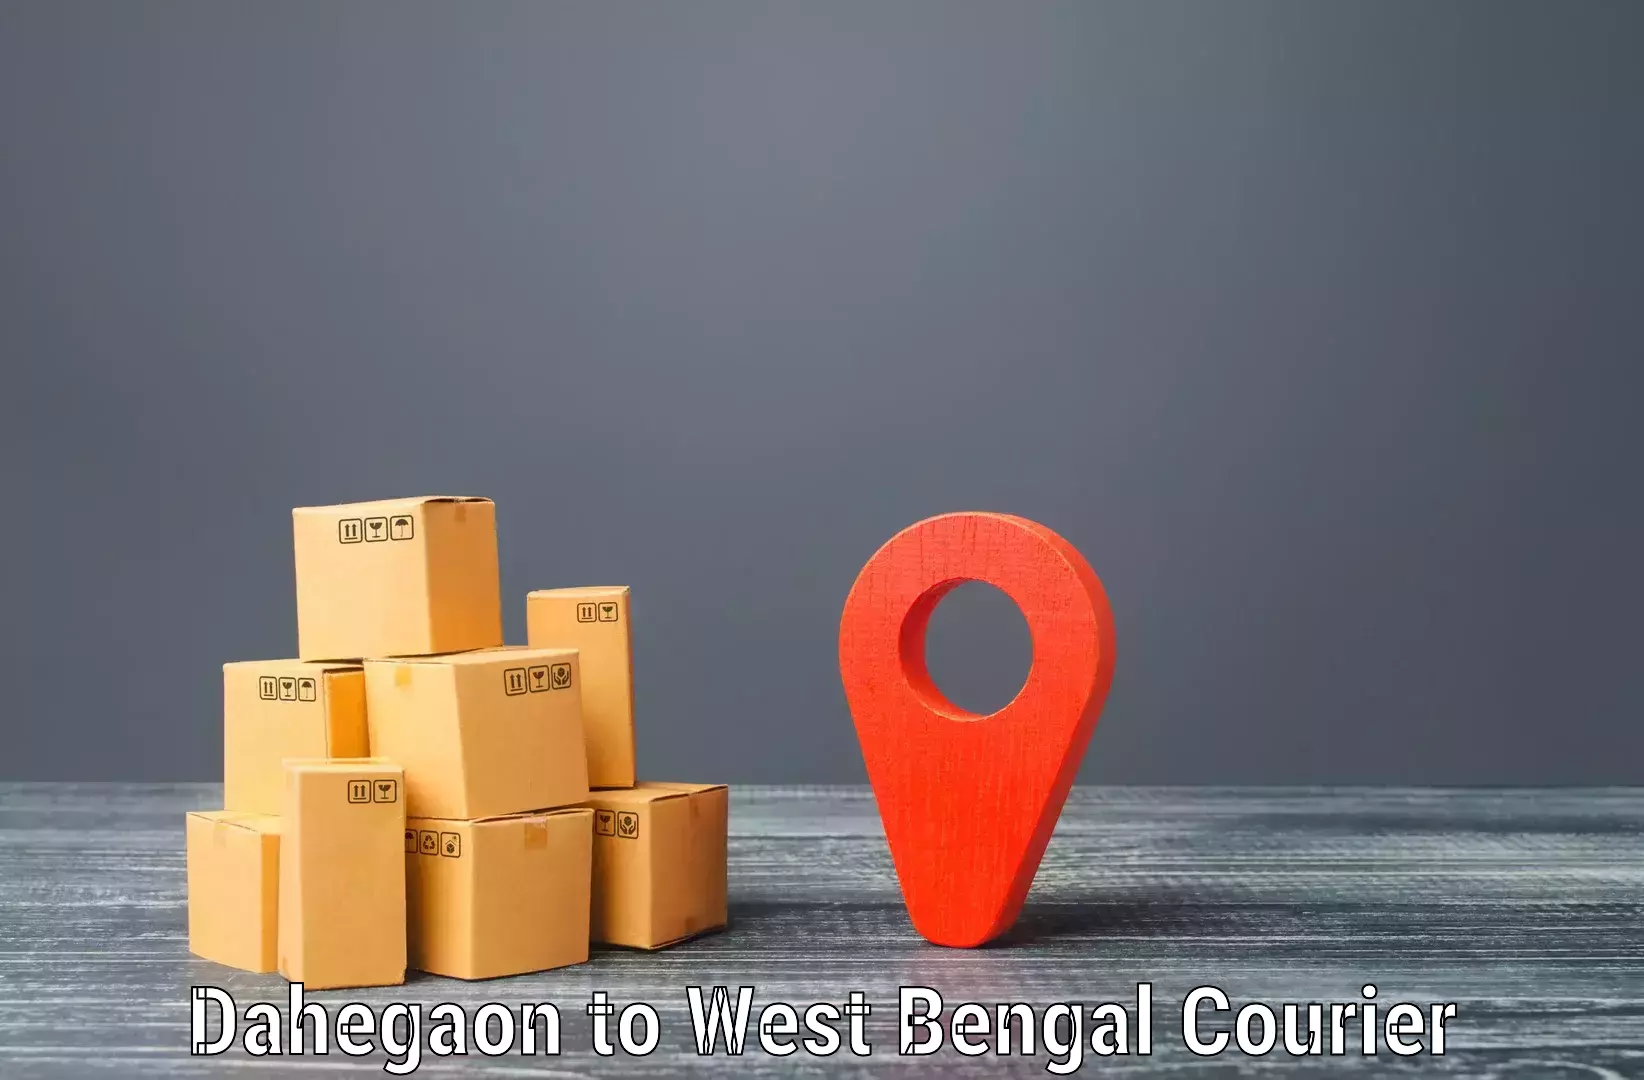 Flexible delivery schedules Dahegaon to Onda